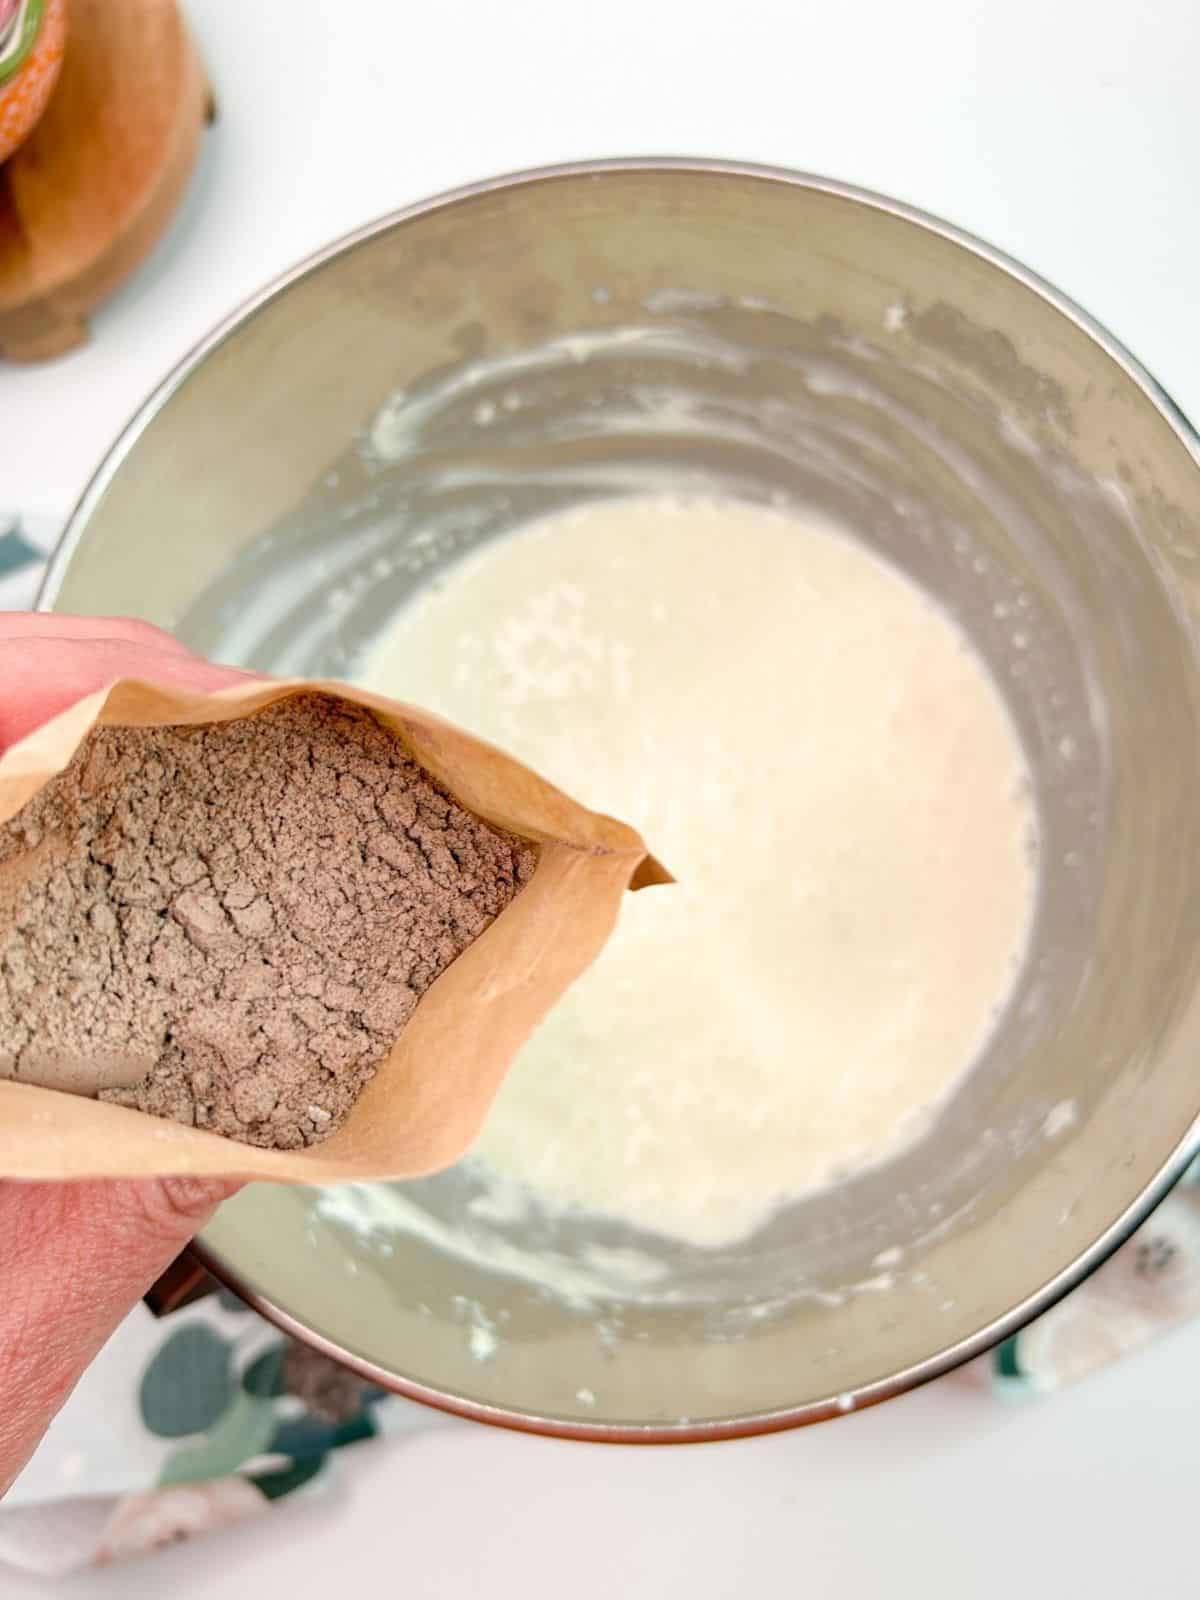 Pudding mix being held over mixing bowl of cream cheese.